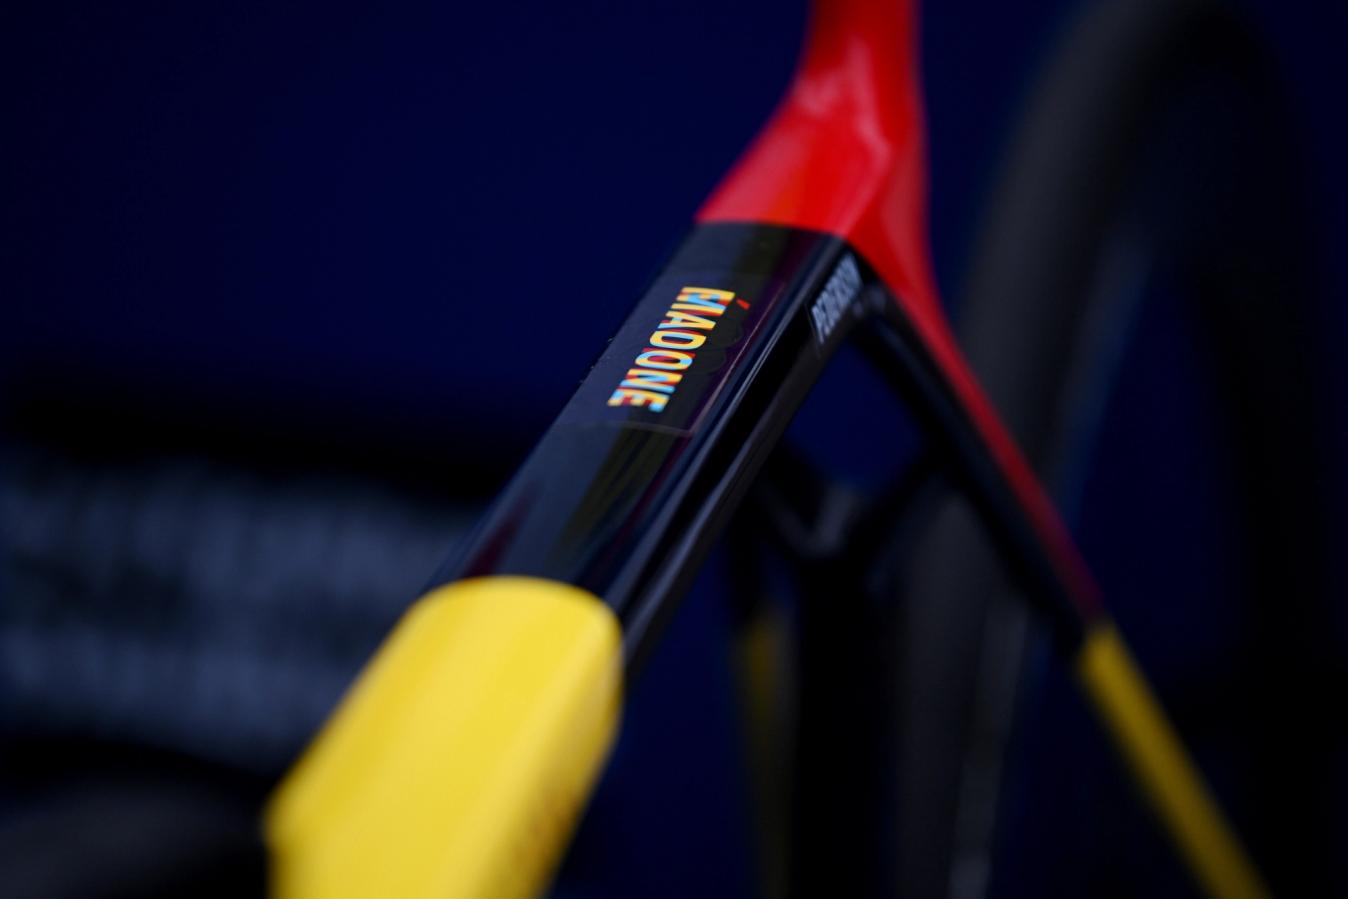 The names of both the Madone and Emonda can be seen on the top tube of the bike